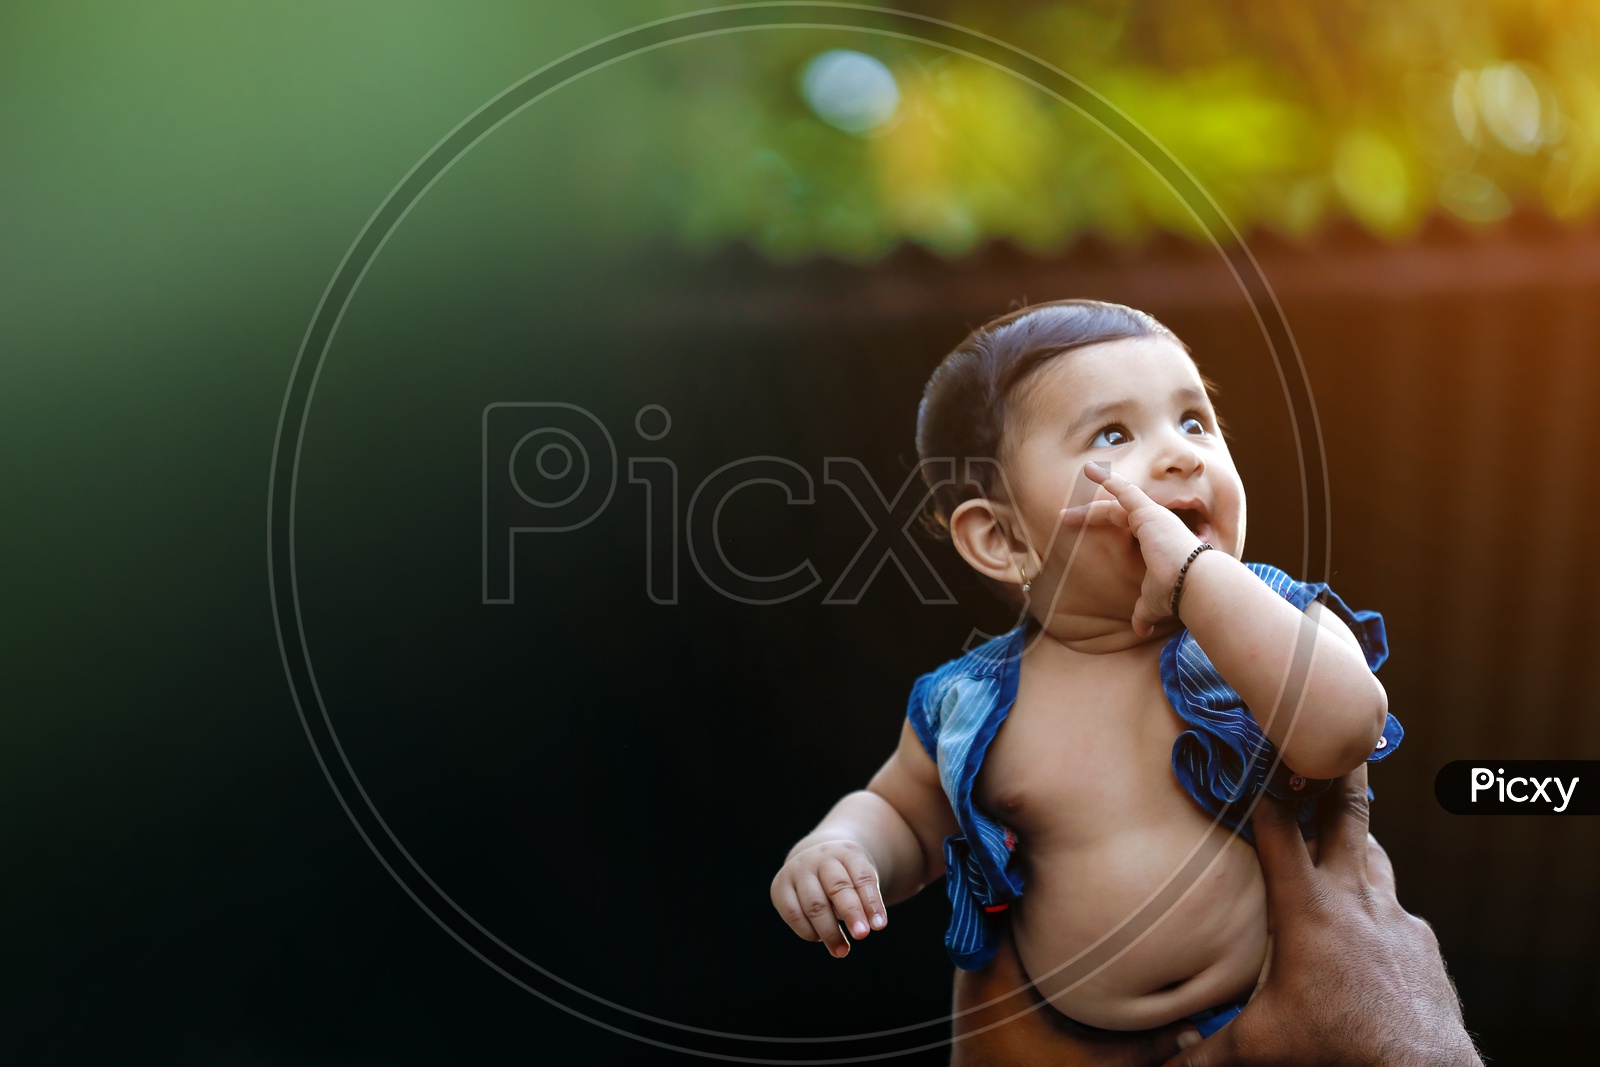 Indian Cute Baby Boy With Smiling Face